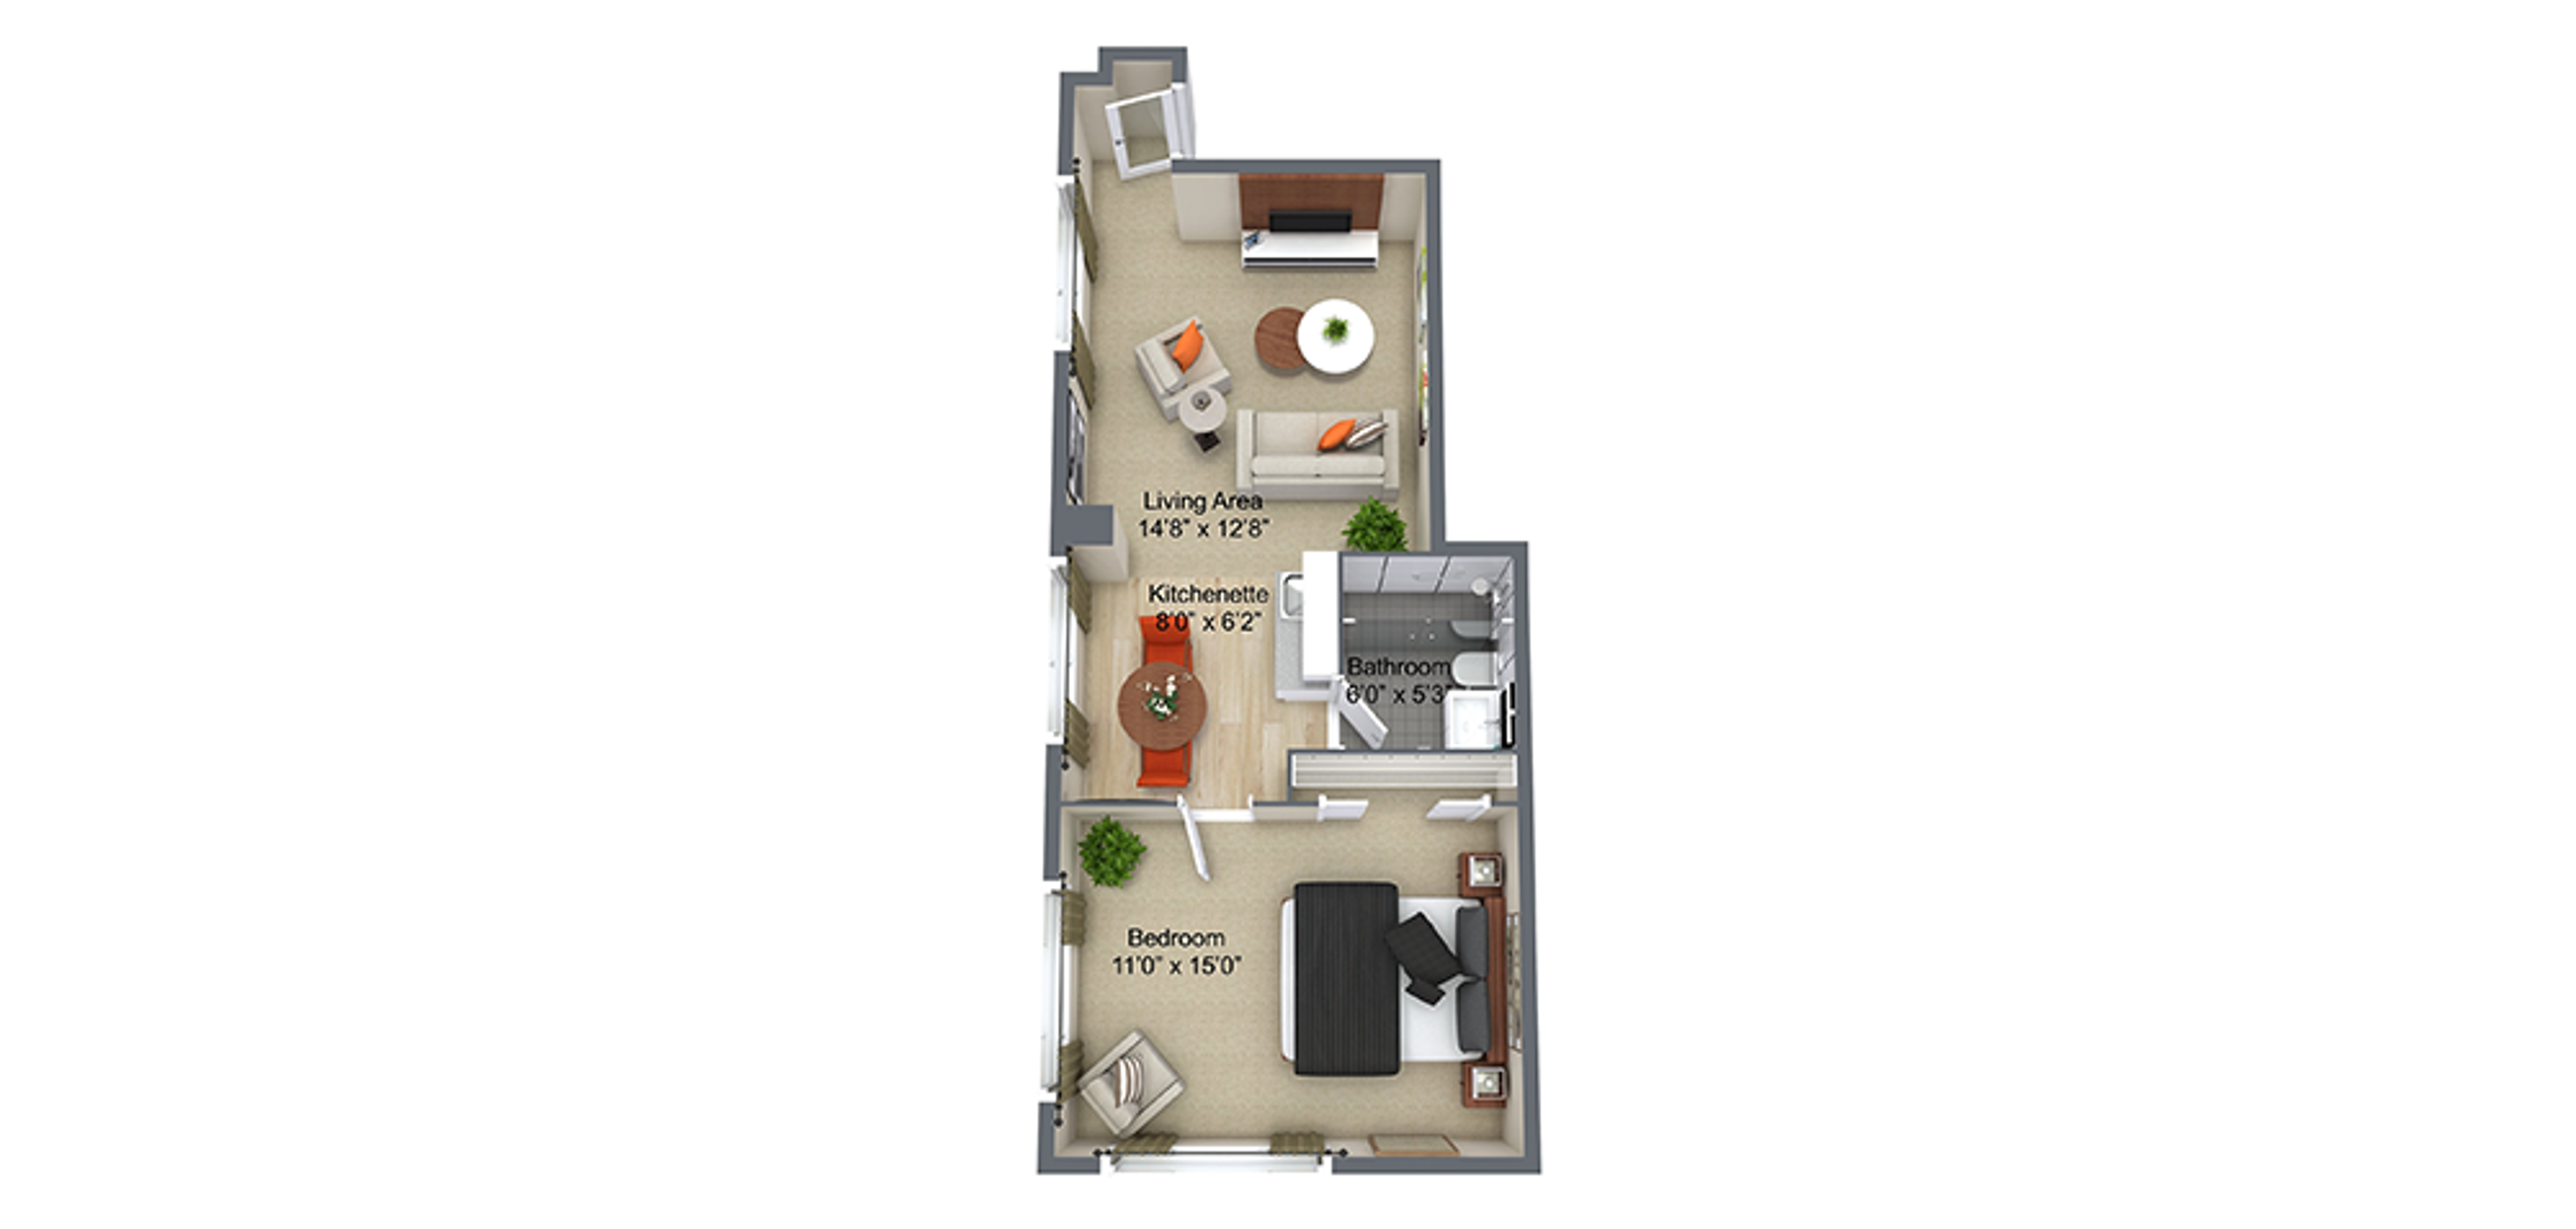 St. Lawrence Place Sample 1 Bedroom Plan